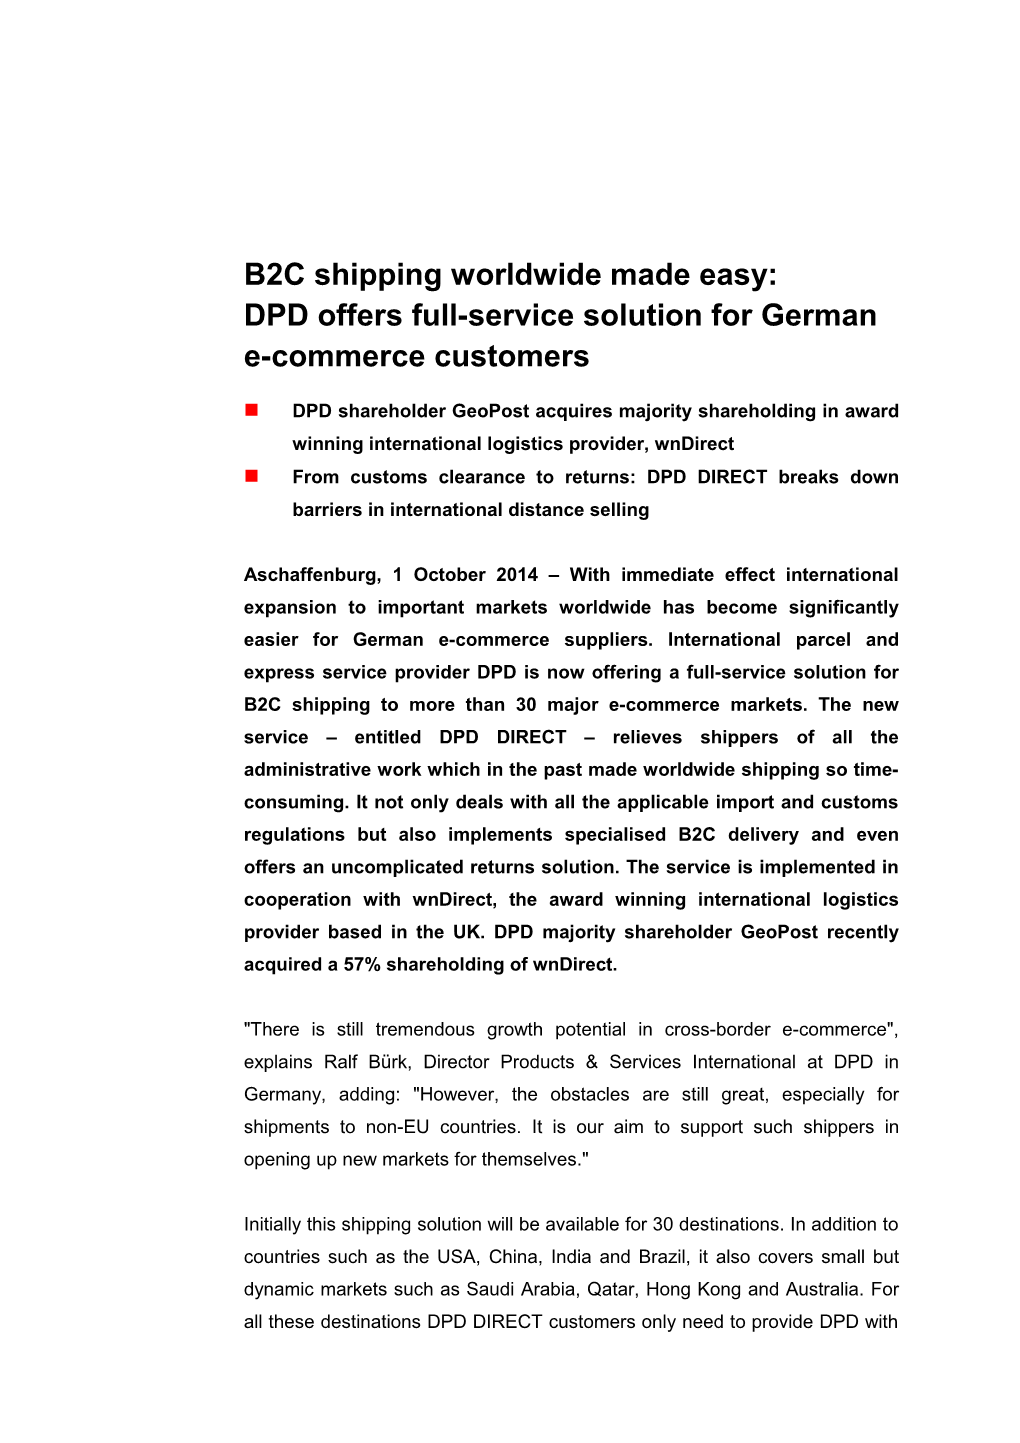 B2C Shipping Worldwide Made Easy: DPD Offers Full-Service Solution for German E-Commerce